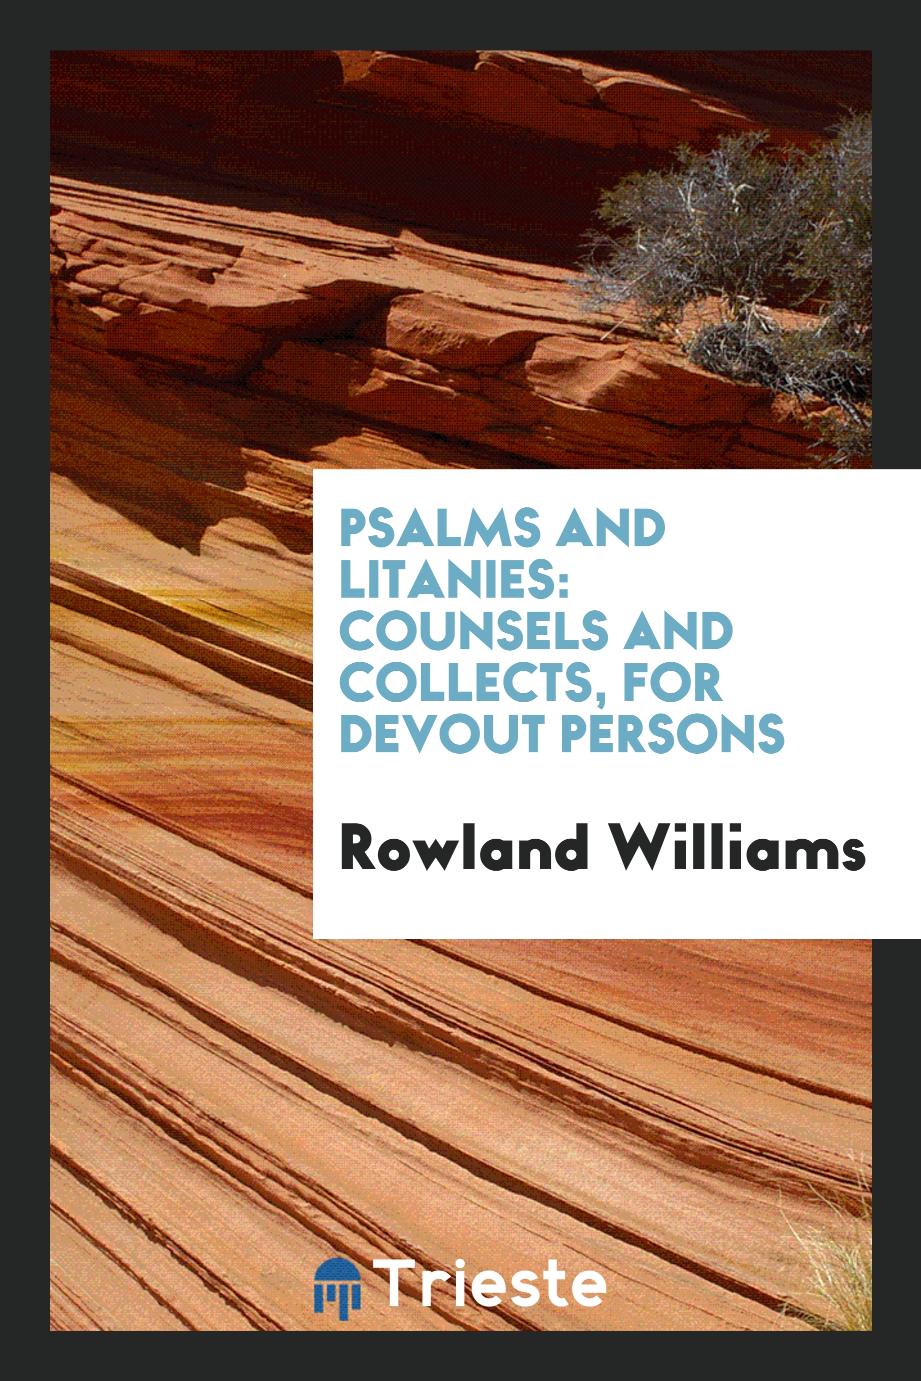 Psalms and Litanies: Counsels and Collects, for Devout Persons